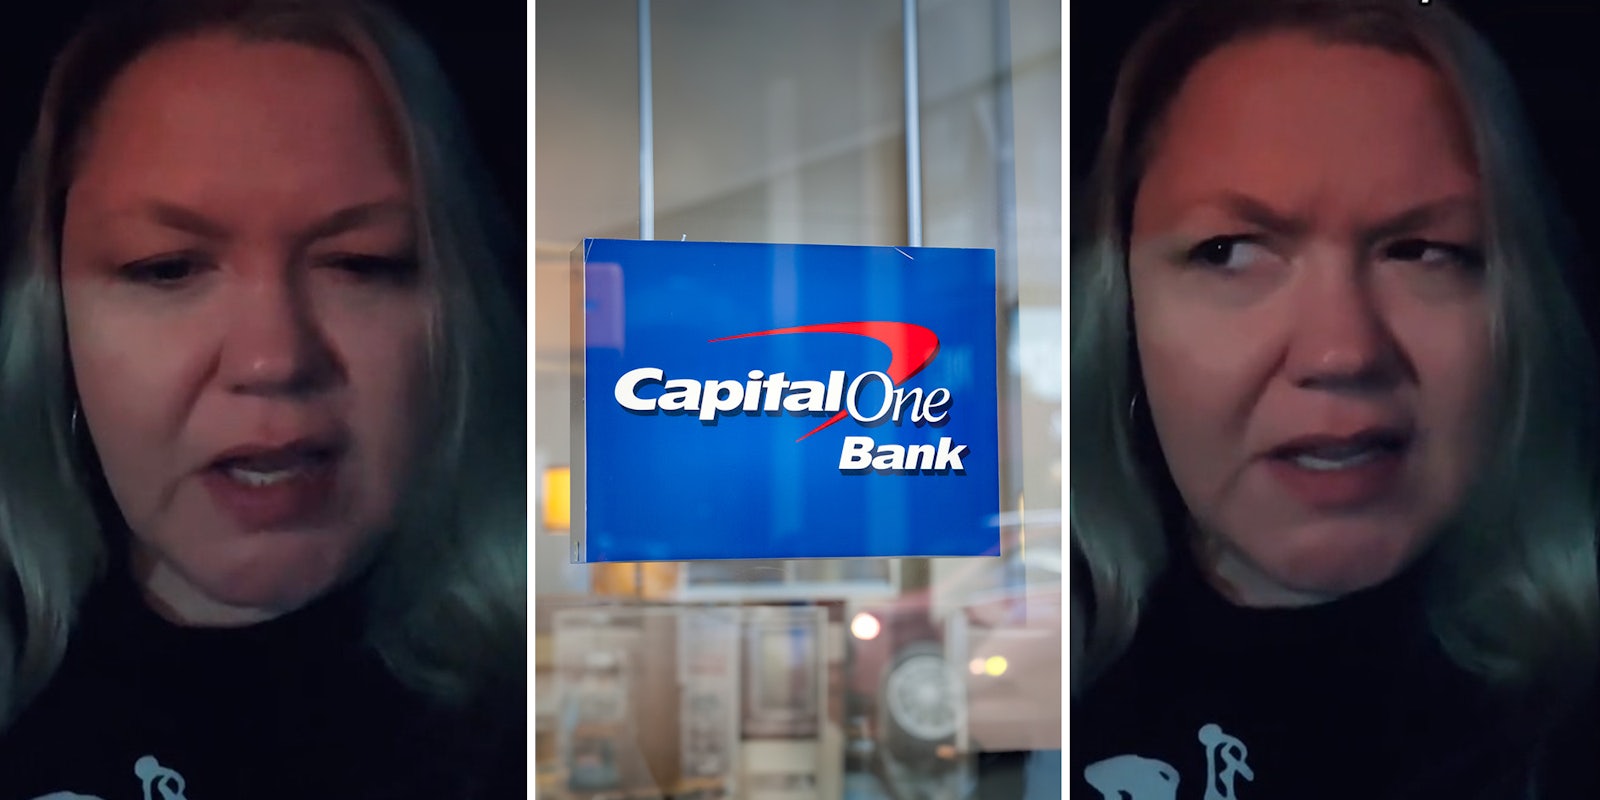 Capital One customer deposits $300 check. The bank only gives her $280